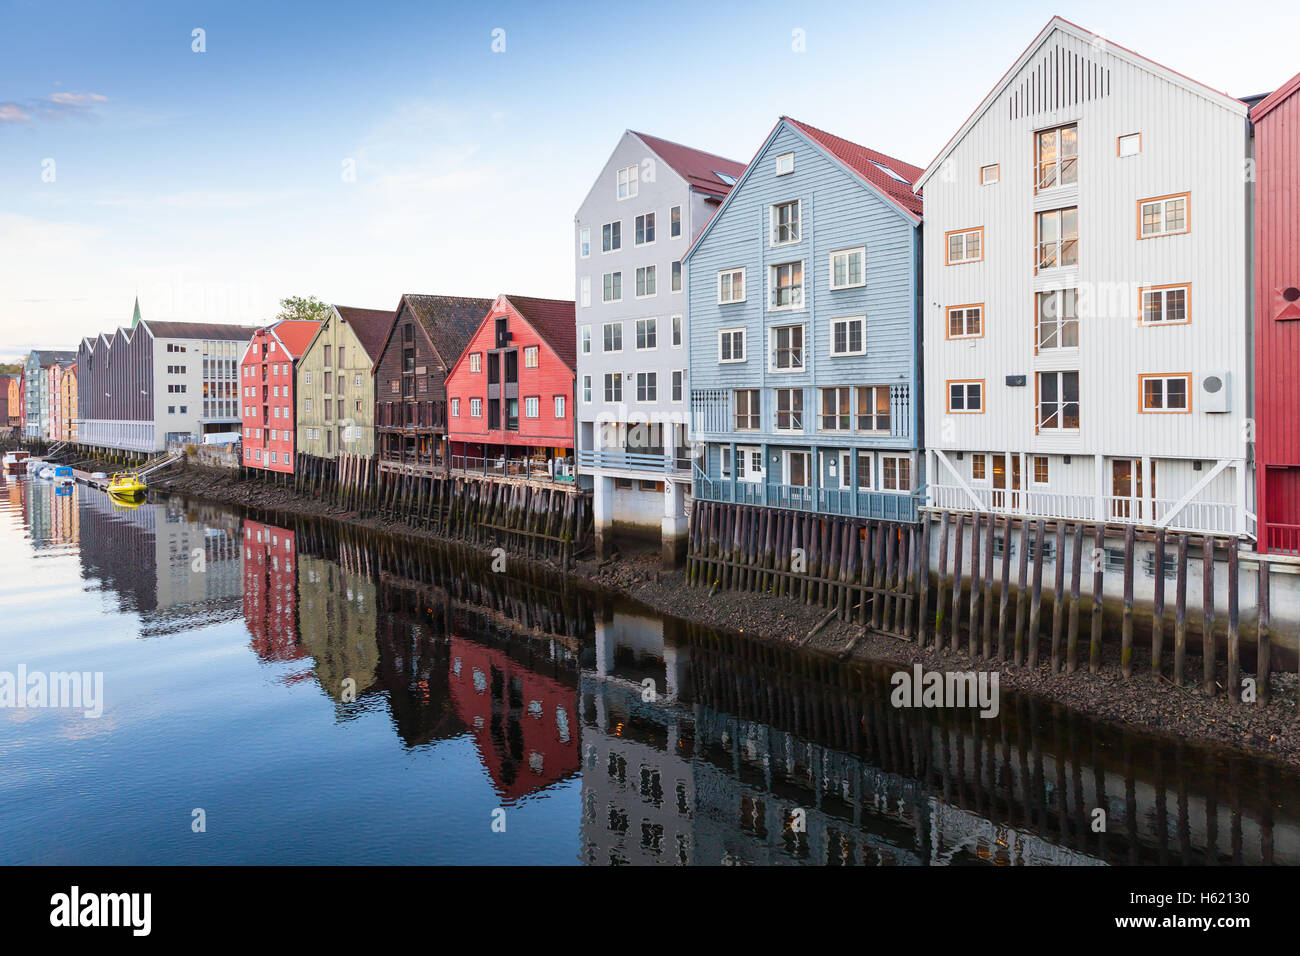 Colorful old wooden houses stand along Nidelva river coast. Trondheim, Norway Stock Photo